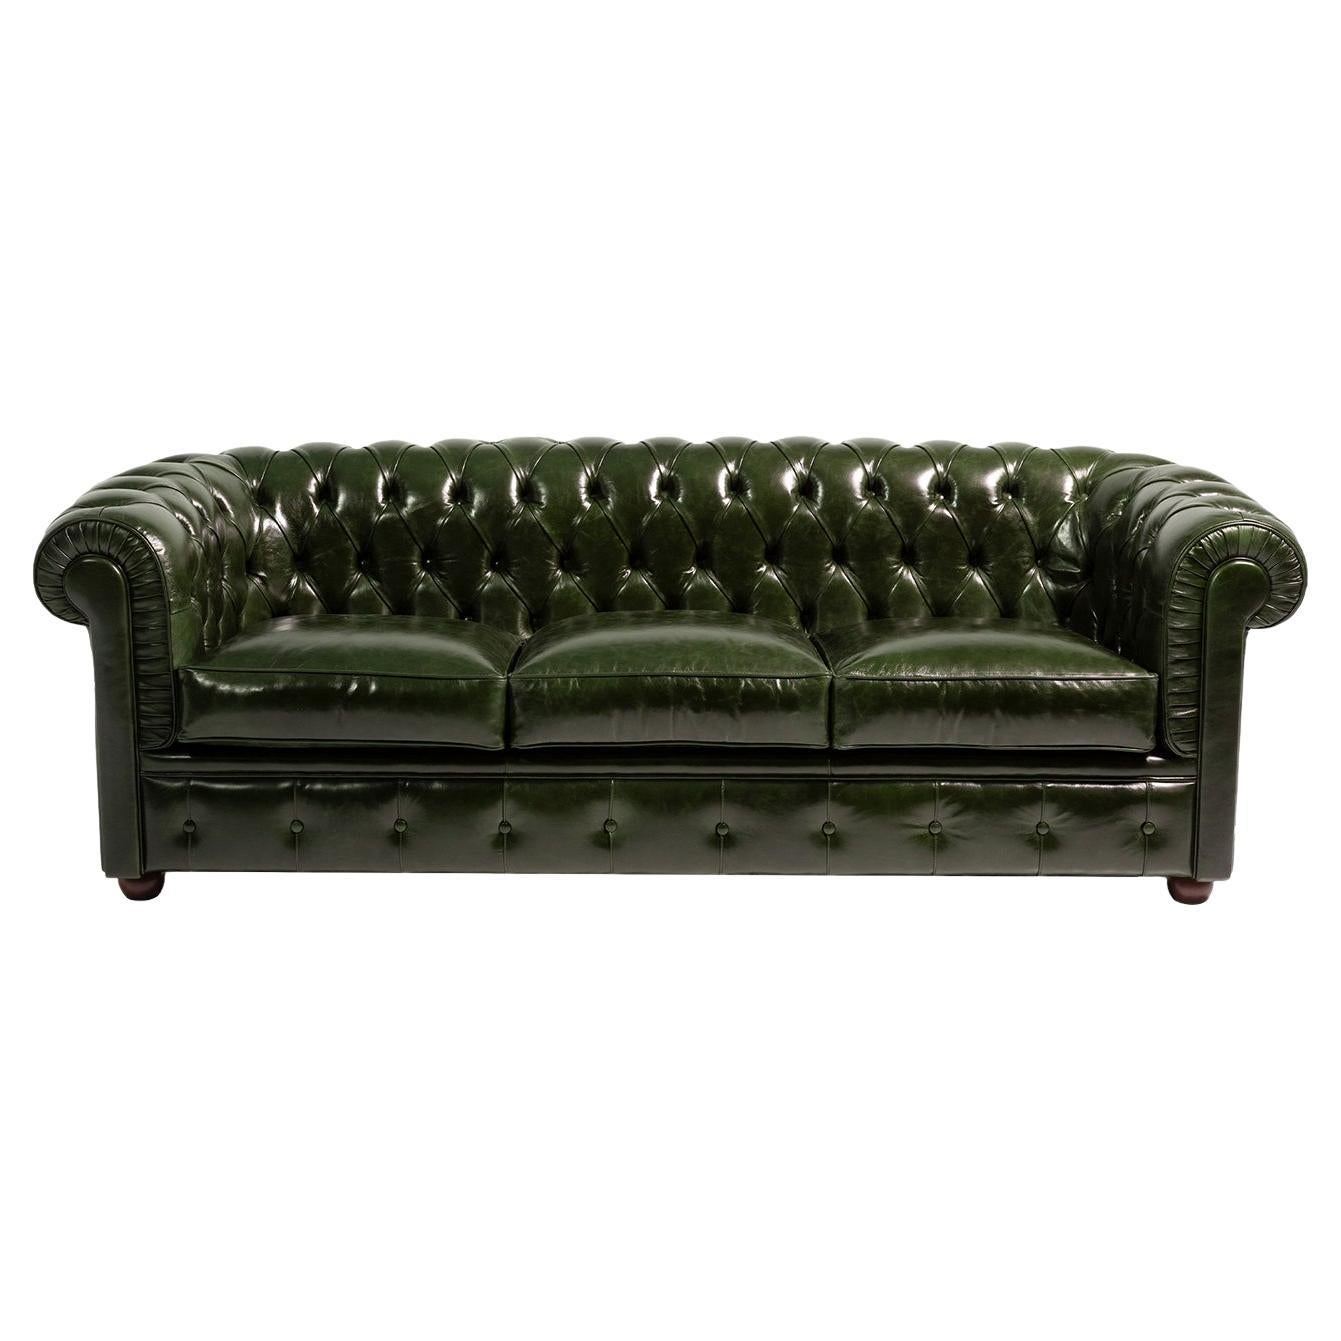 Chesterfield Green Leather 3-Seater Sofa